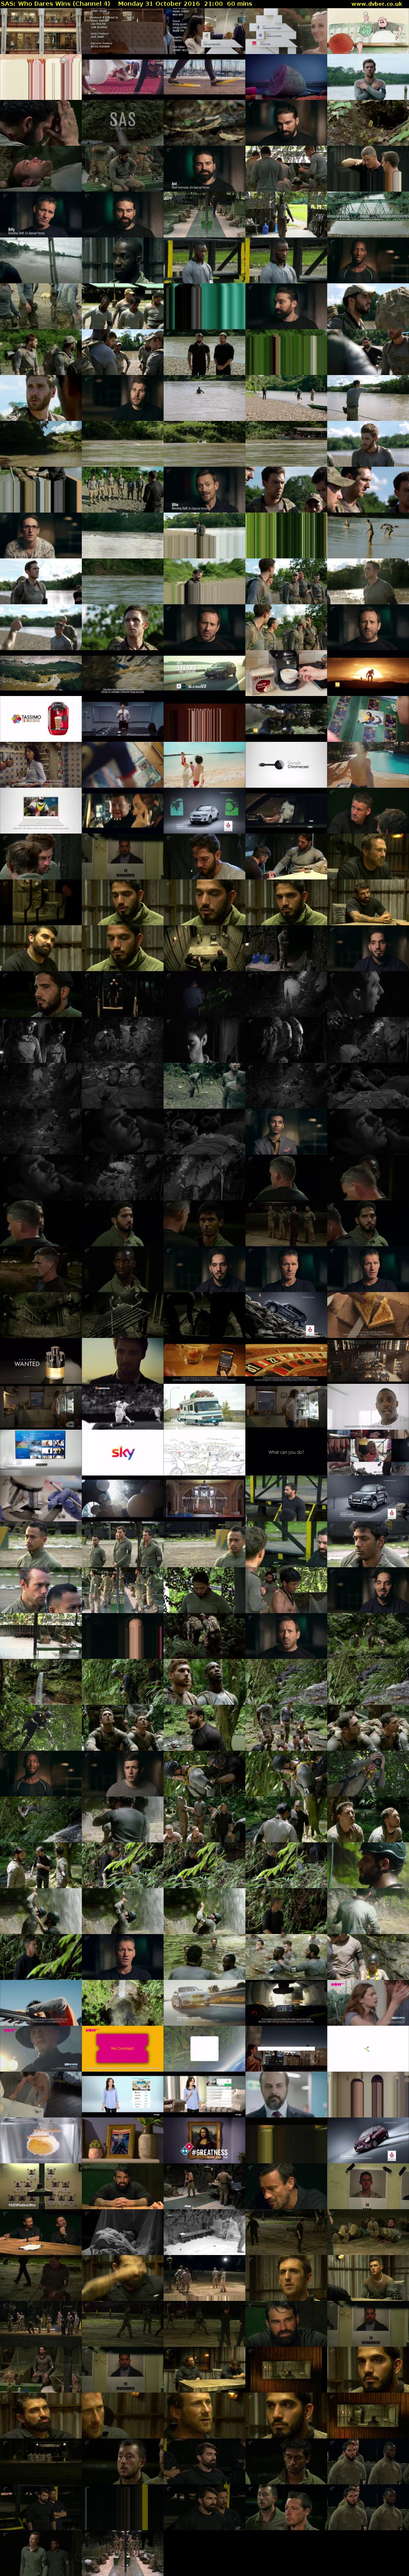 SAS: Who Dares Wins (Channel 4) Monday 31 October 2016 21:00 - 22:00